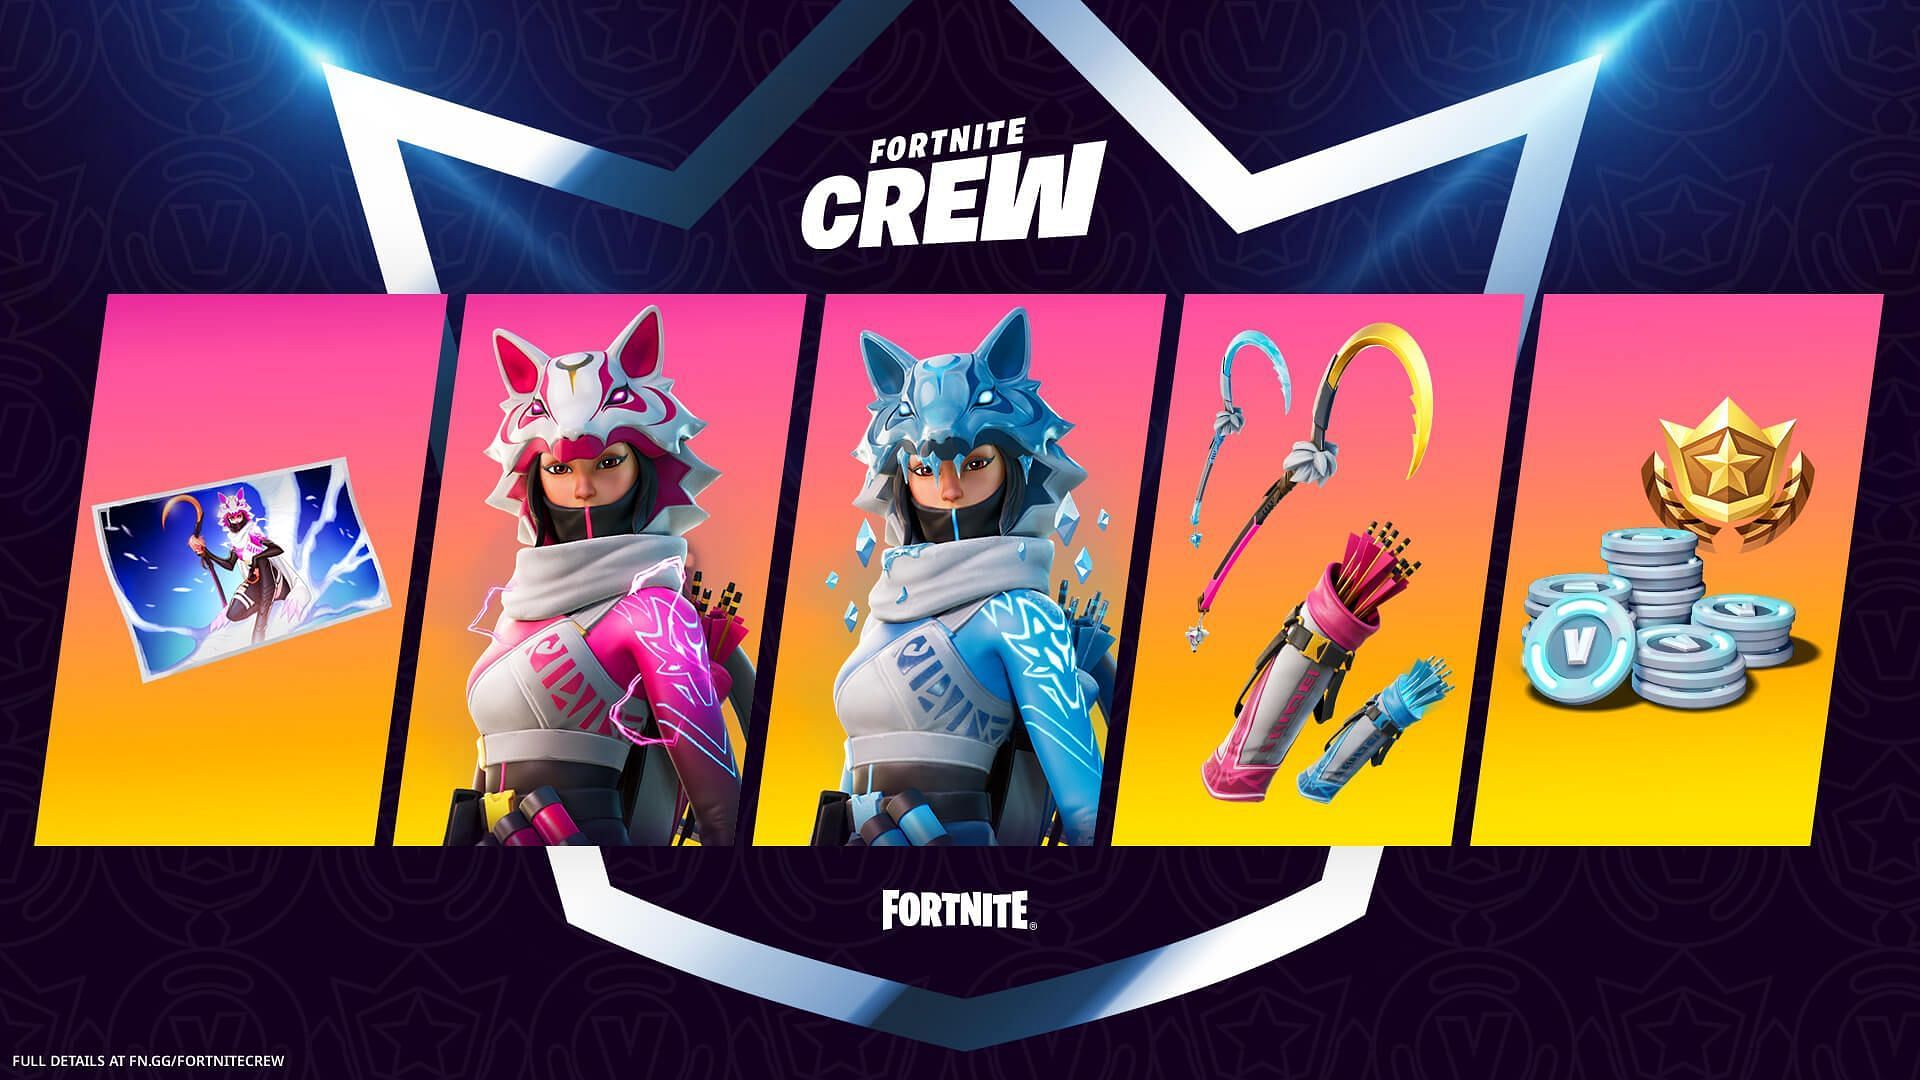 Fortnite Crew subscribers enjoyed the Vi outfit. (Image via Epic Games)